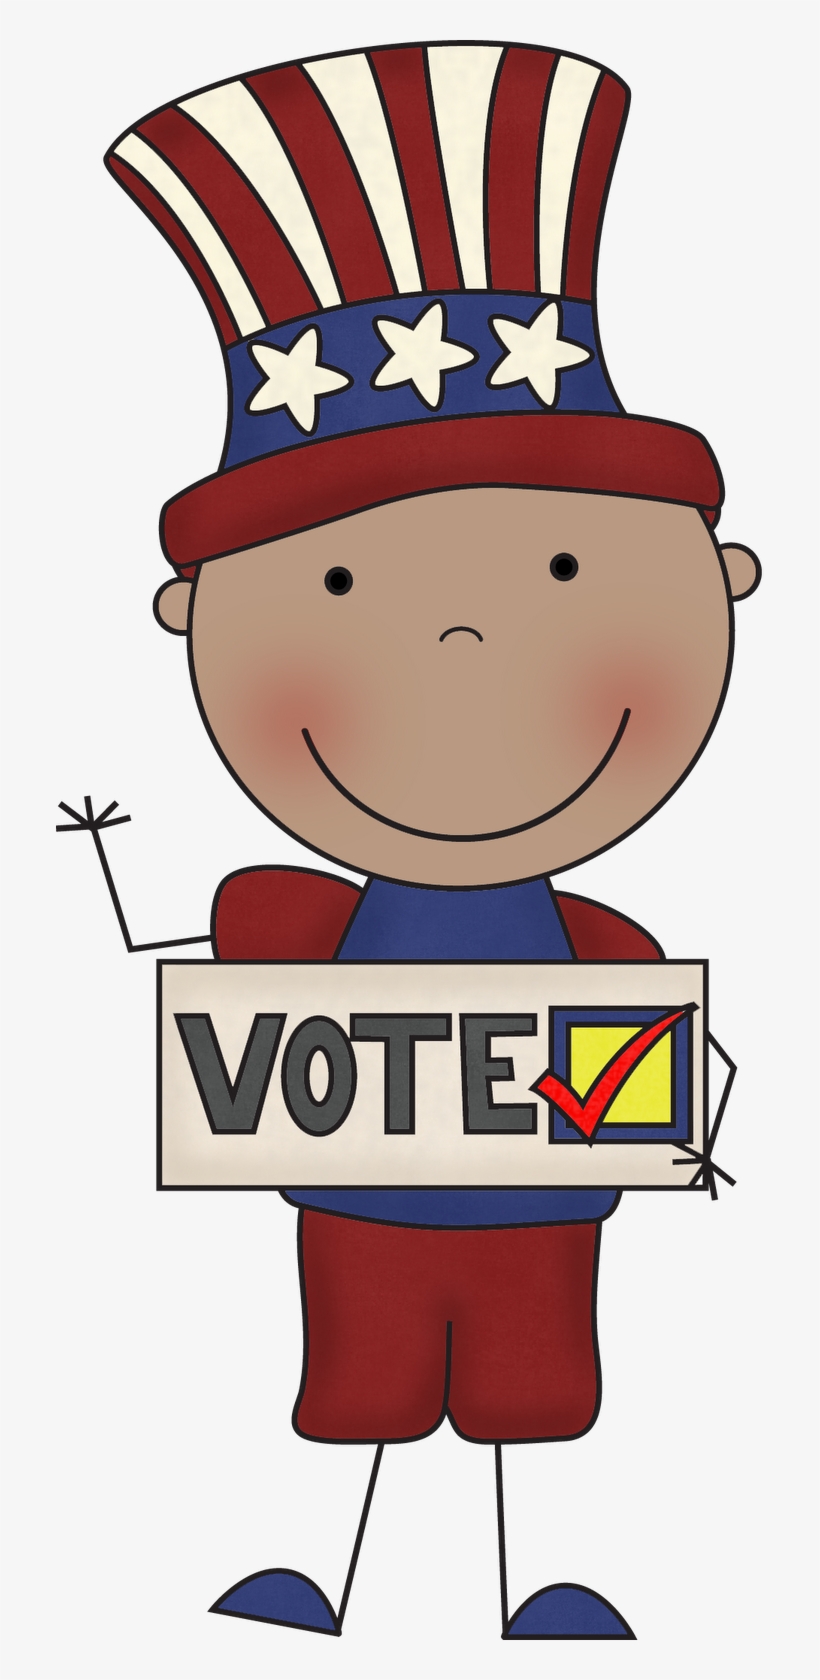 Election Day Clip Art Dpftp6 Clipart - Election Day Clip Art, transparent png #3587112